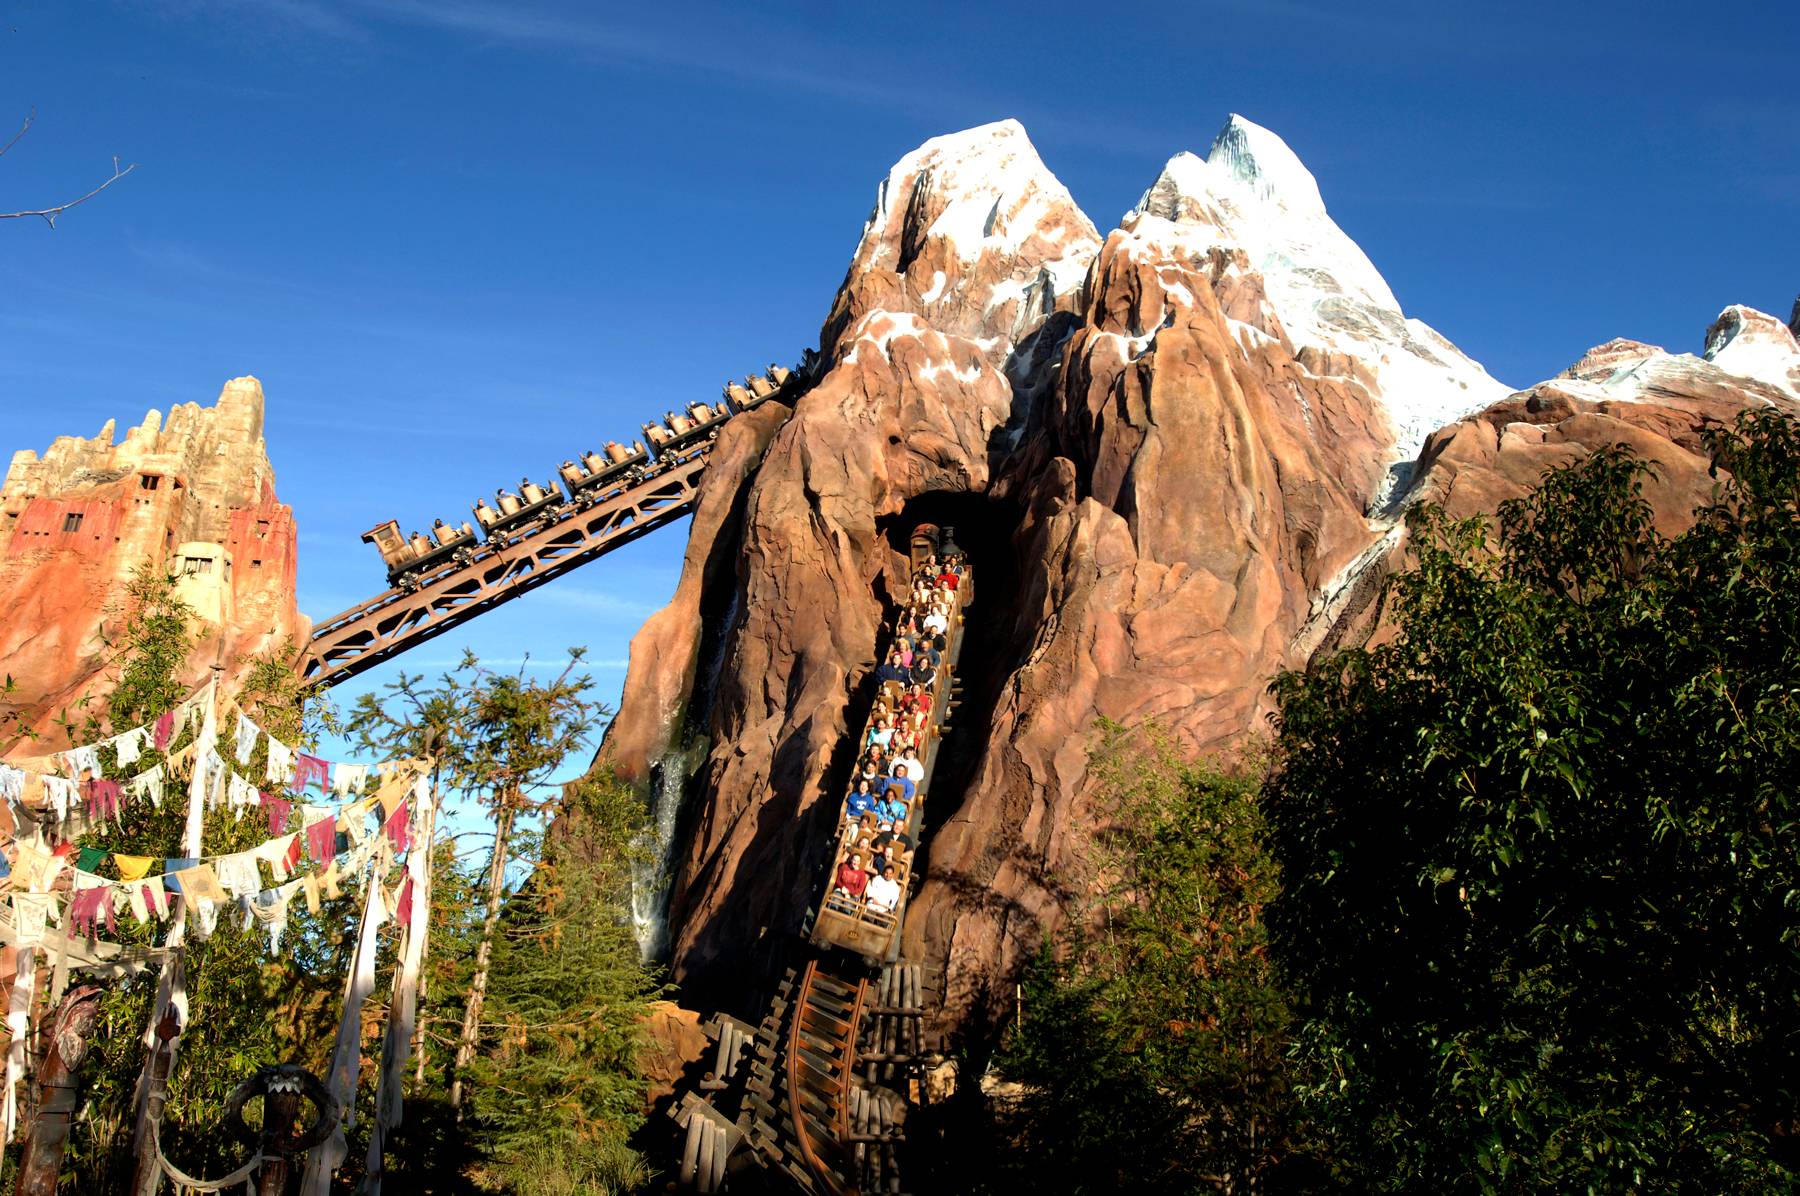 Expedition Everest walkway opening ceremony soon